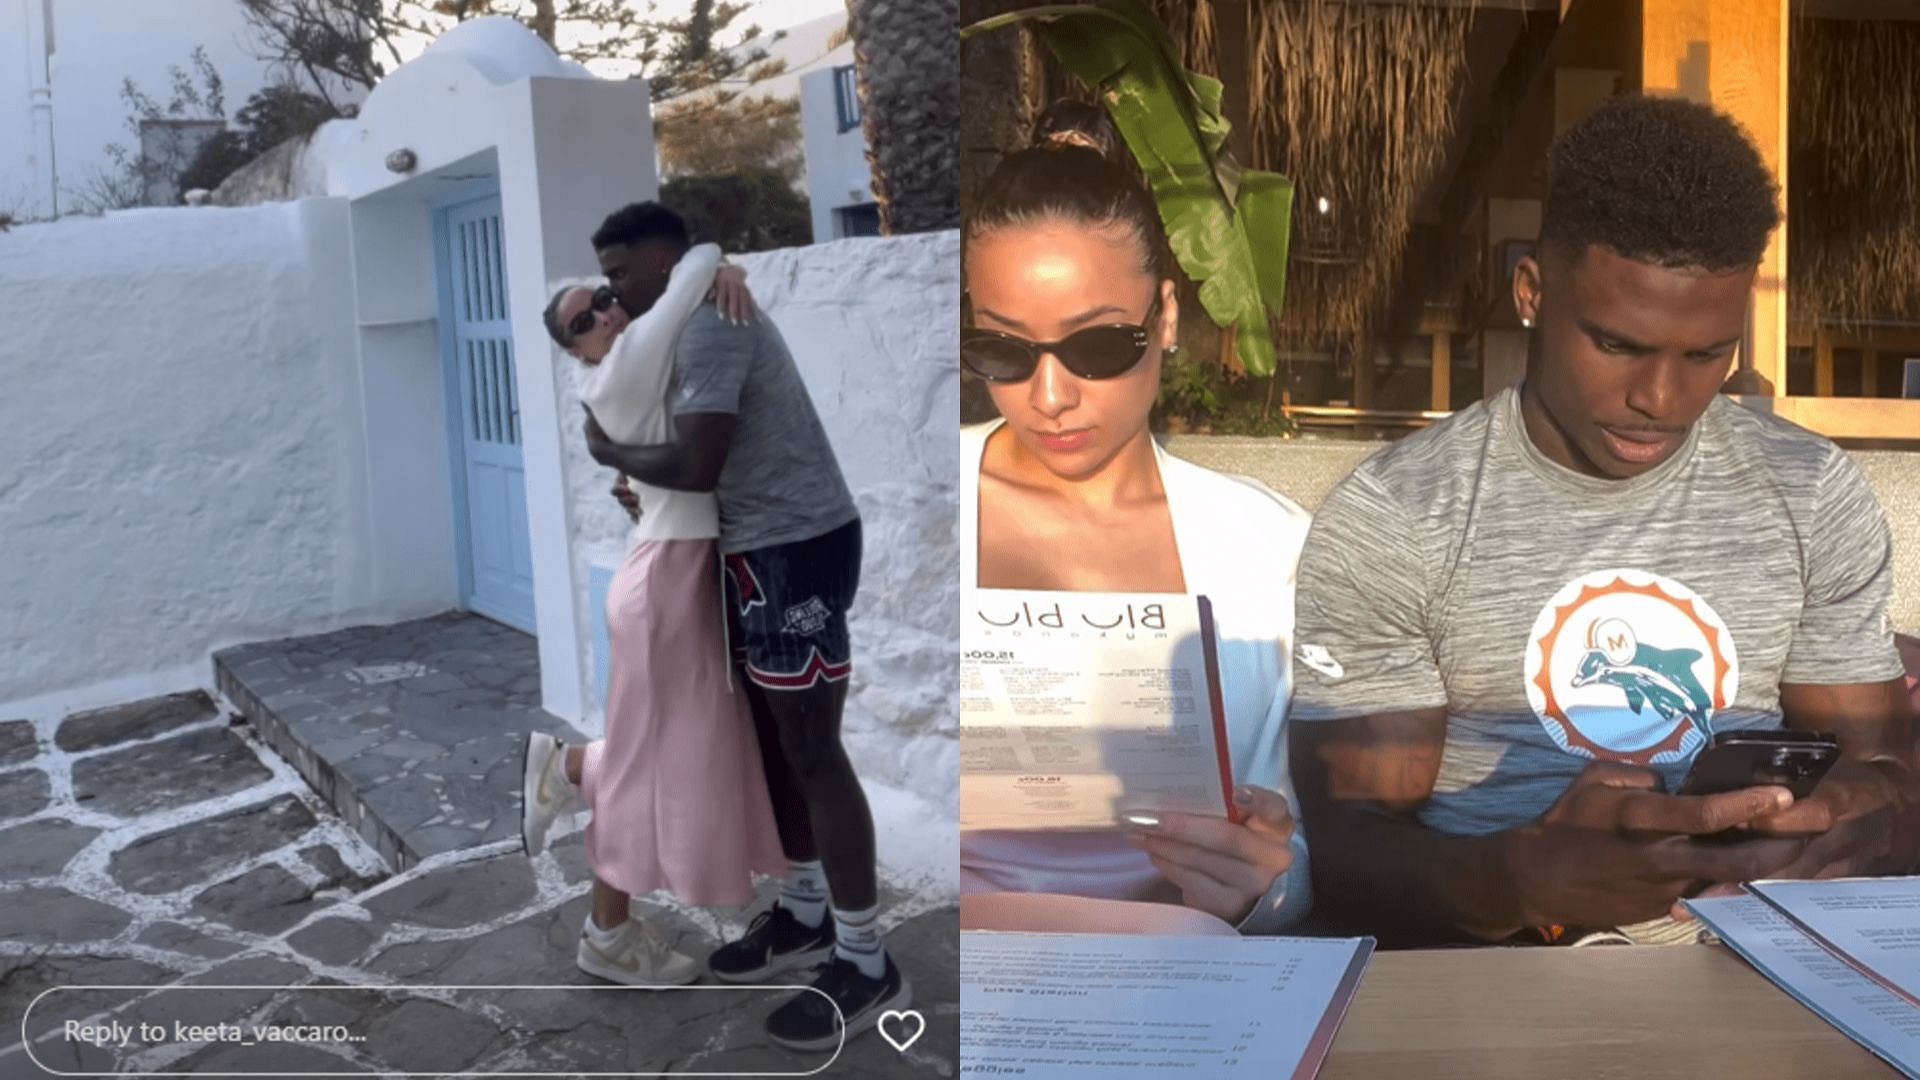 Tyreek Hill and his wife, Keeta Vaccaro, went on a vacation in Mykonos, Greece